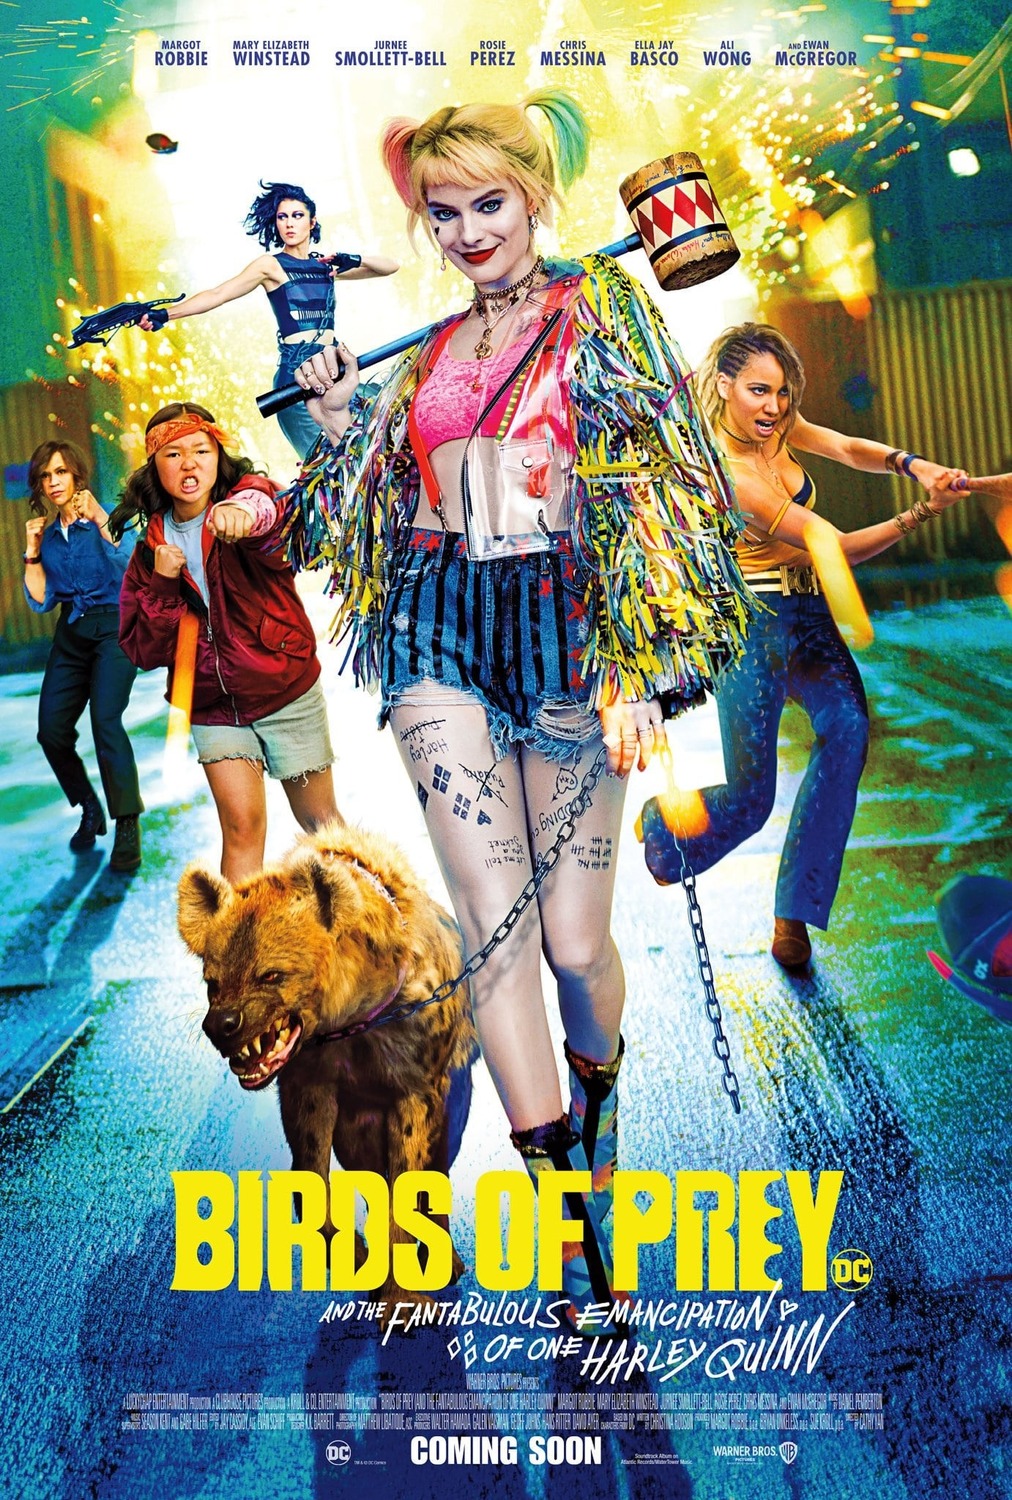 Birds Of Prey (And The Fantabulous Emancipation of One Harley Quinn) review: These dames ain’t no damsels